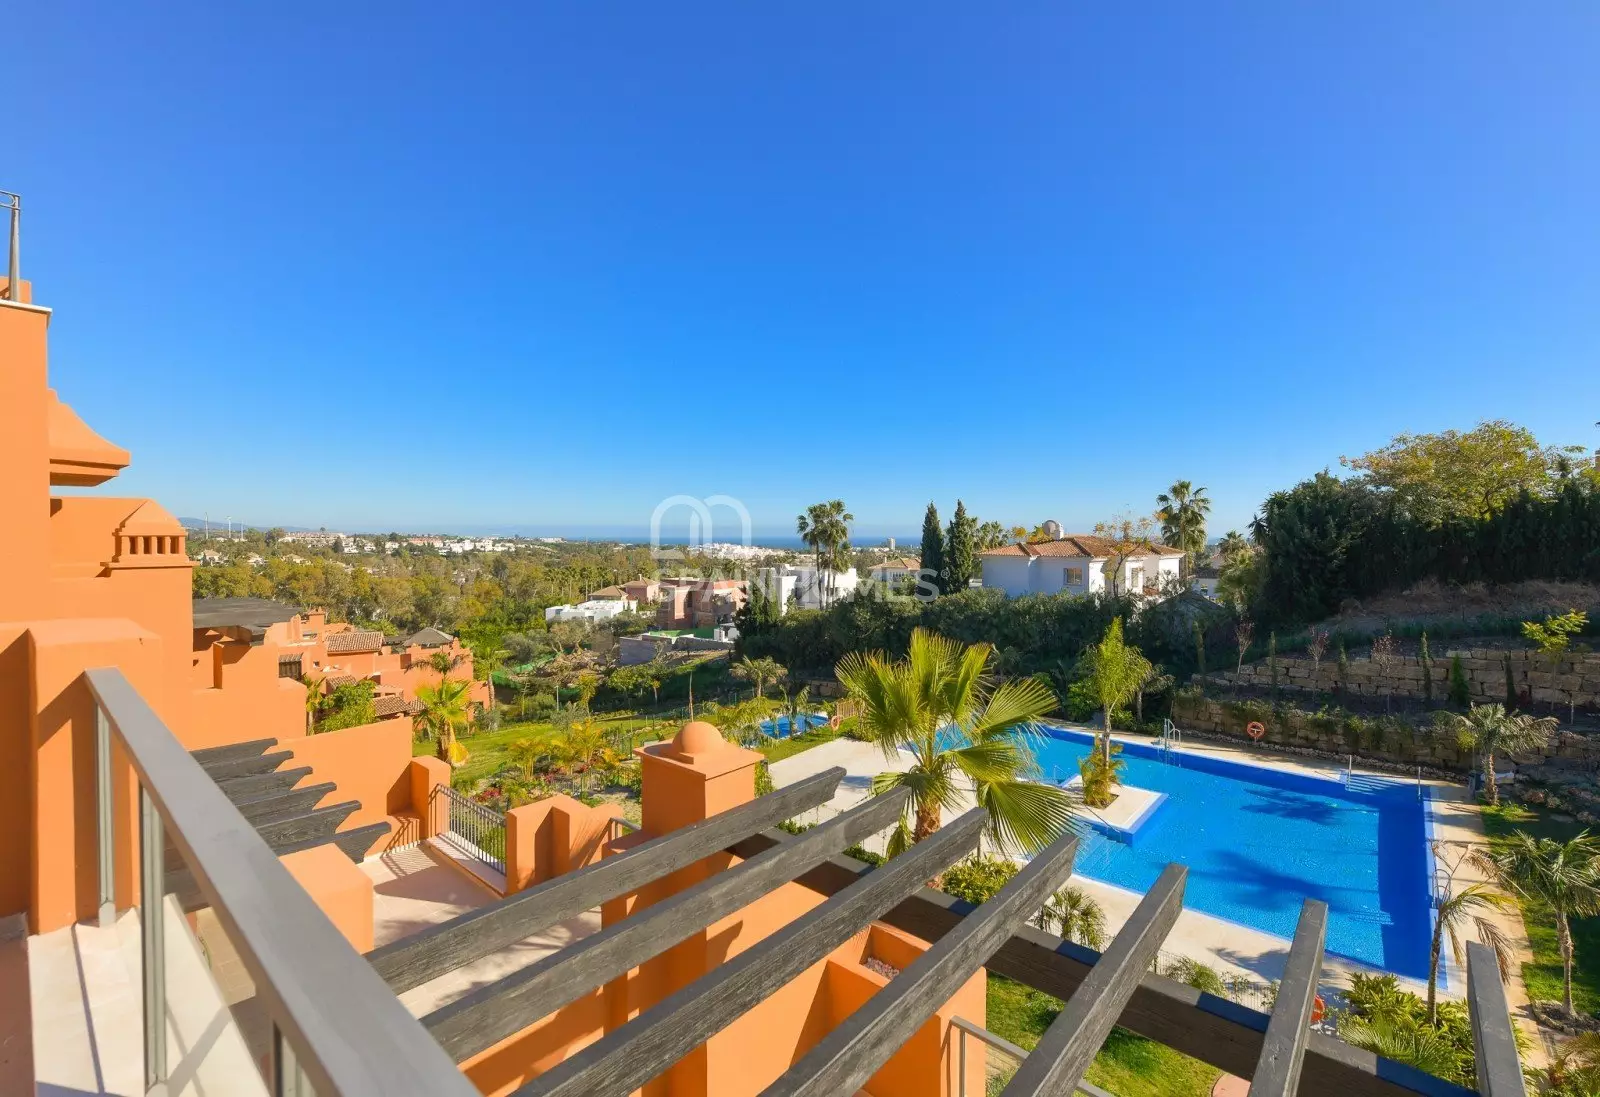 Apartments with Solarium in the Heart of the Golf Valley in Marbella